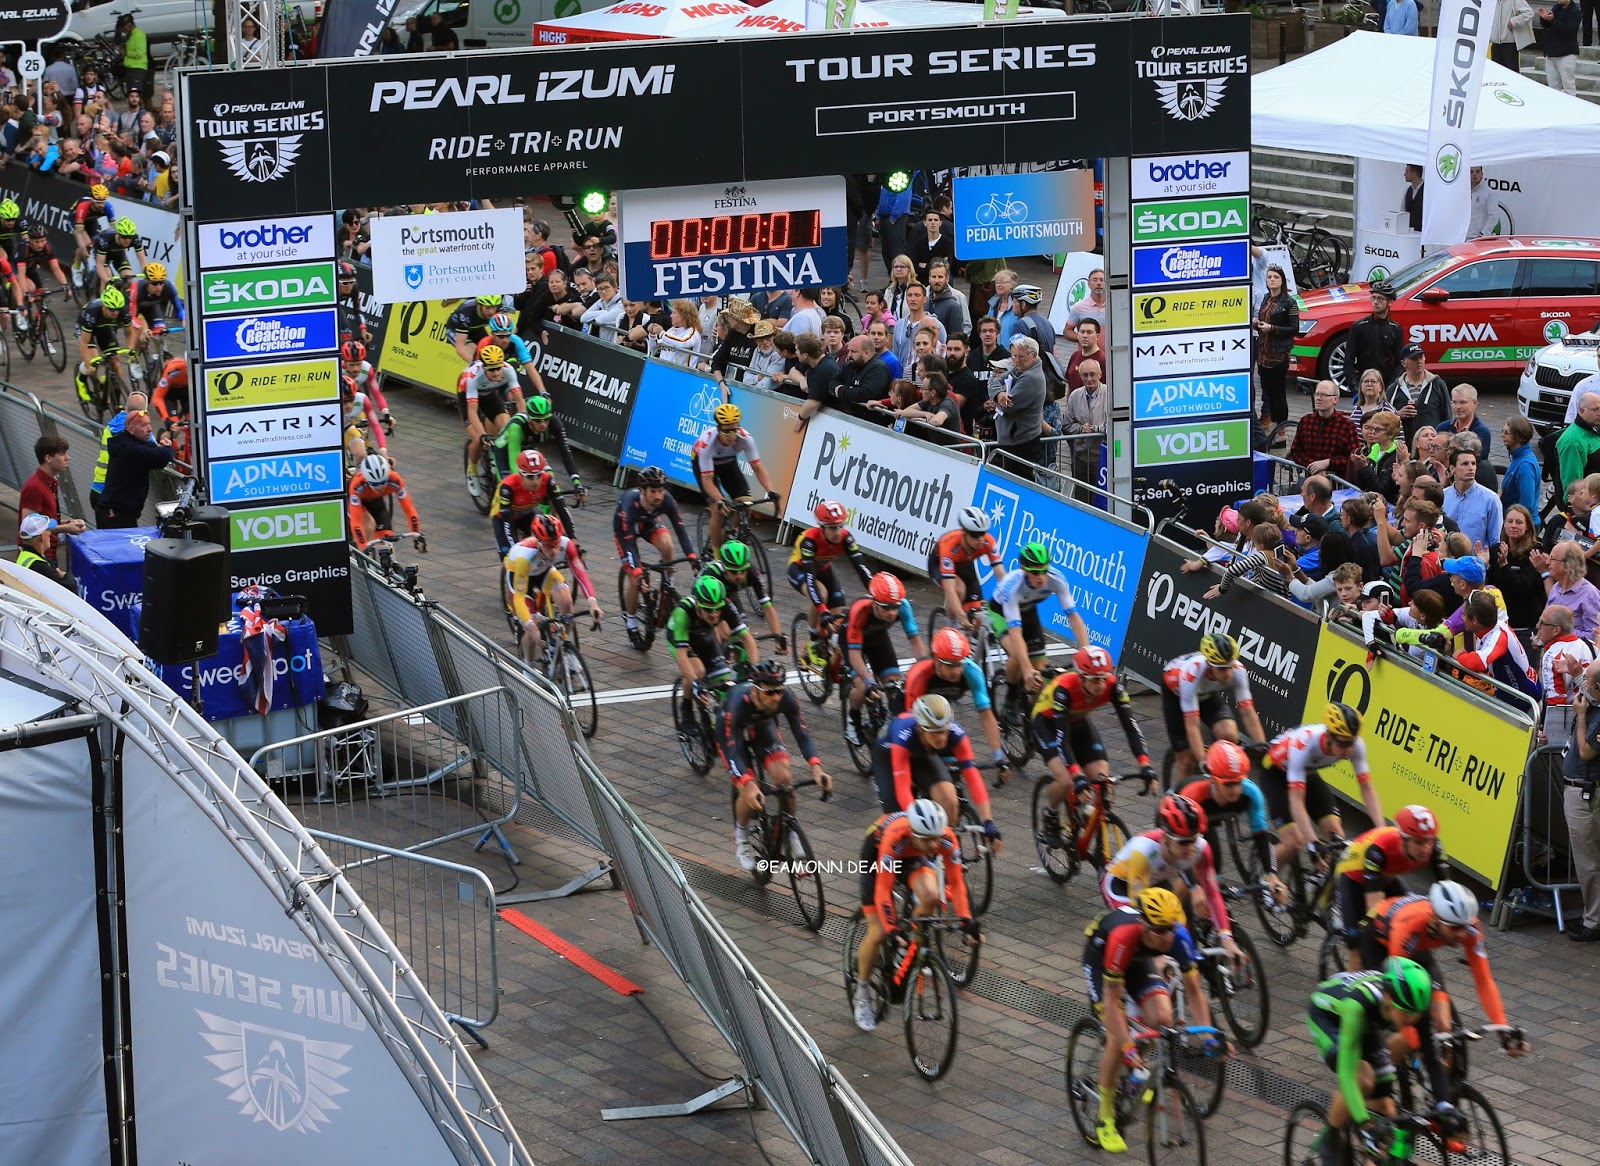 Local Riders,Local Races Tour Series 2017, Dates Announced